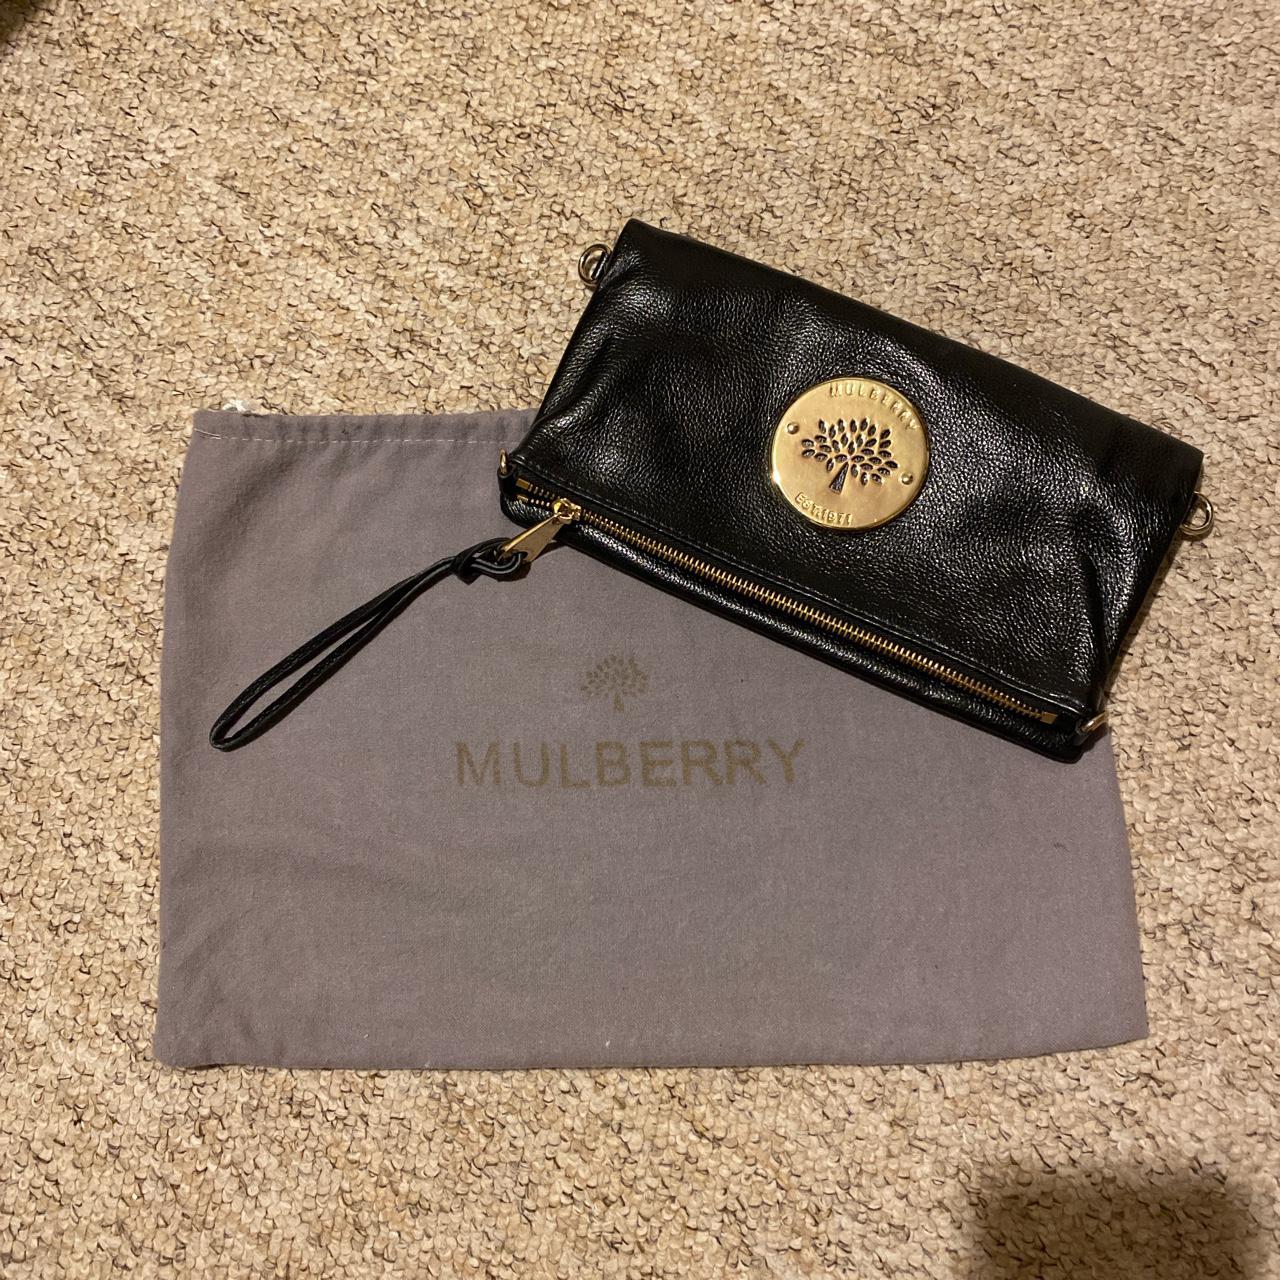 Mulberry Daria French Purse in Taupe Spongy Pebbled Leather - SOLD